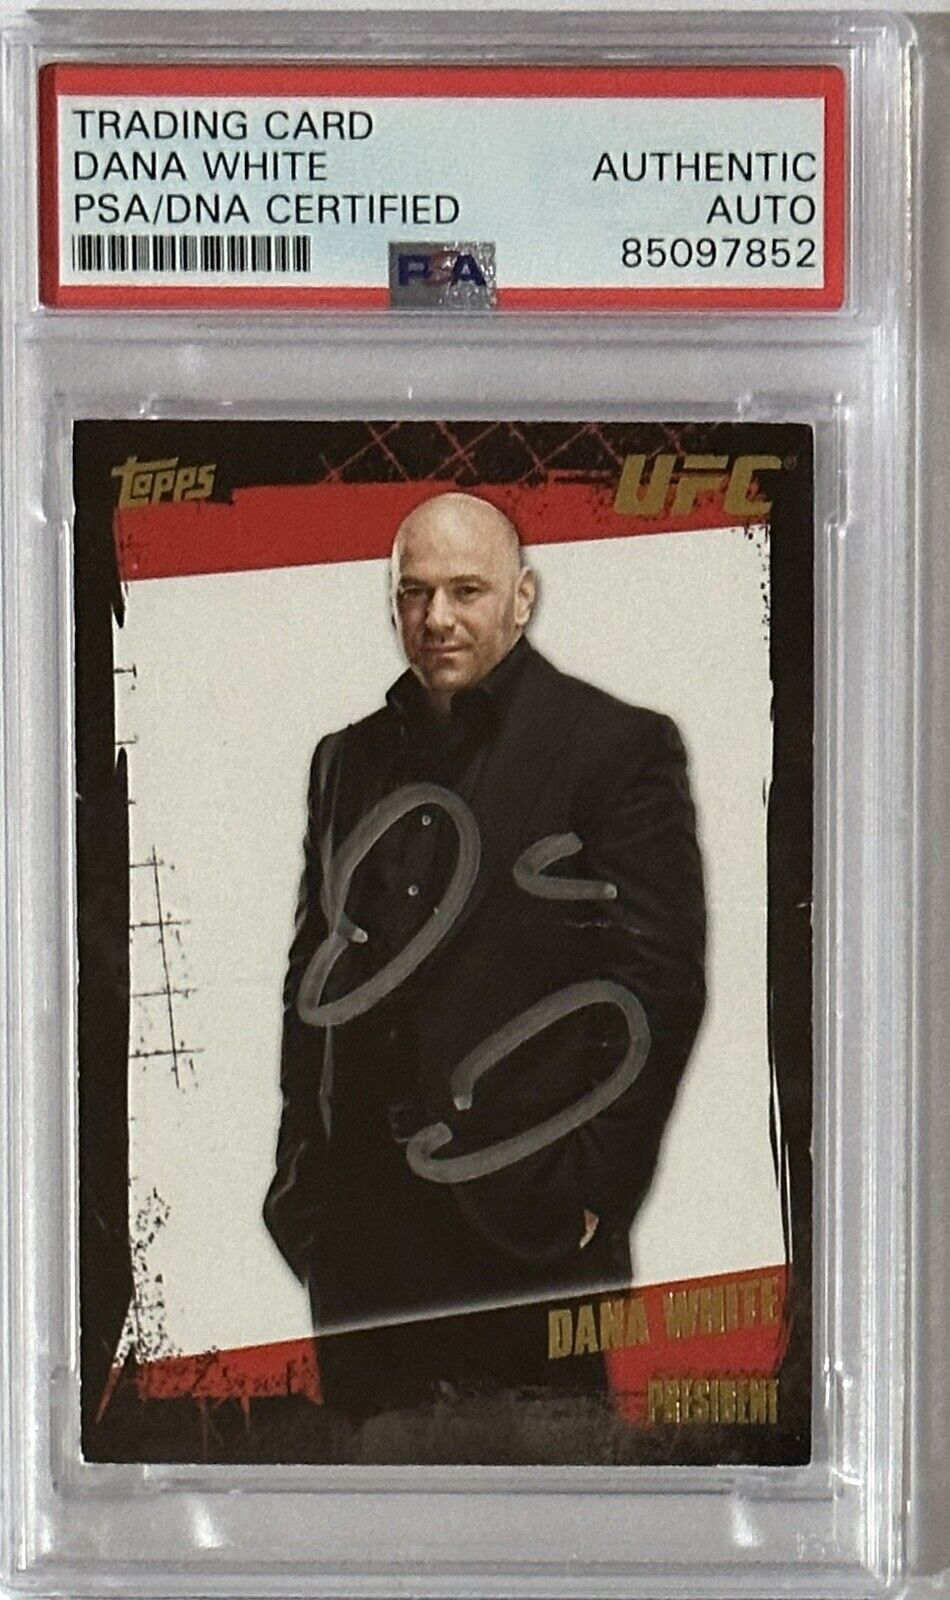 2010 Topps UFC GOLD Parallel Dana White Signed Card PSA DNA AUTOGRAPH *CREASED*